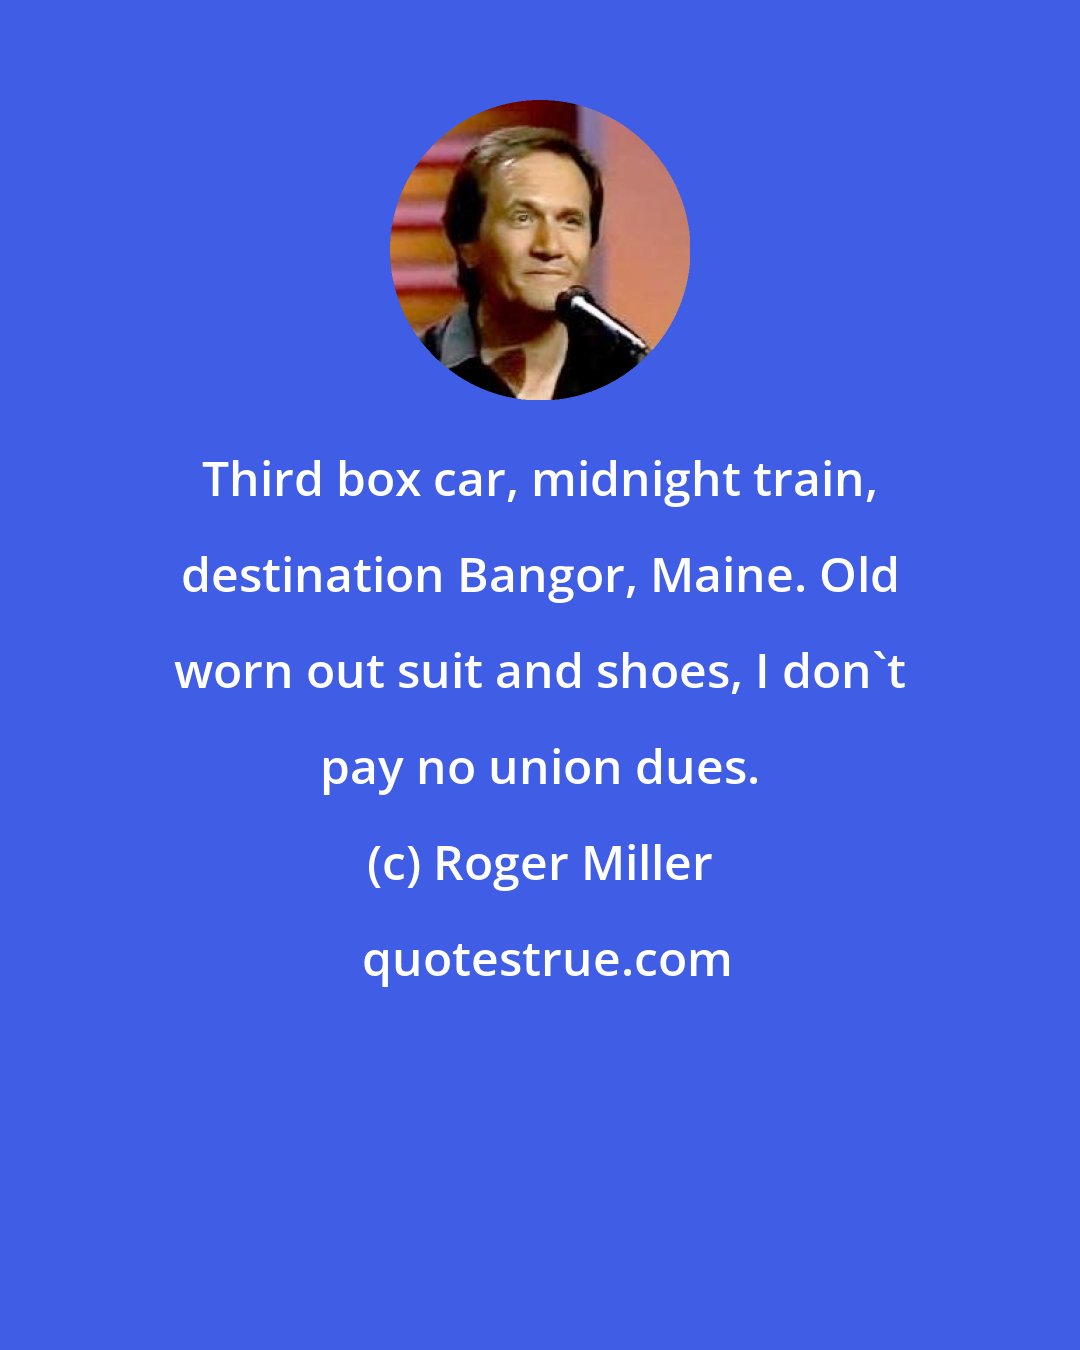 Roger Miller: Third box car, midnight train, destination Bangor, Maine. Old worn out suit and shoes, I don't pay no union dues.